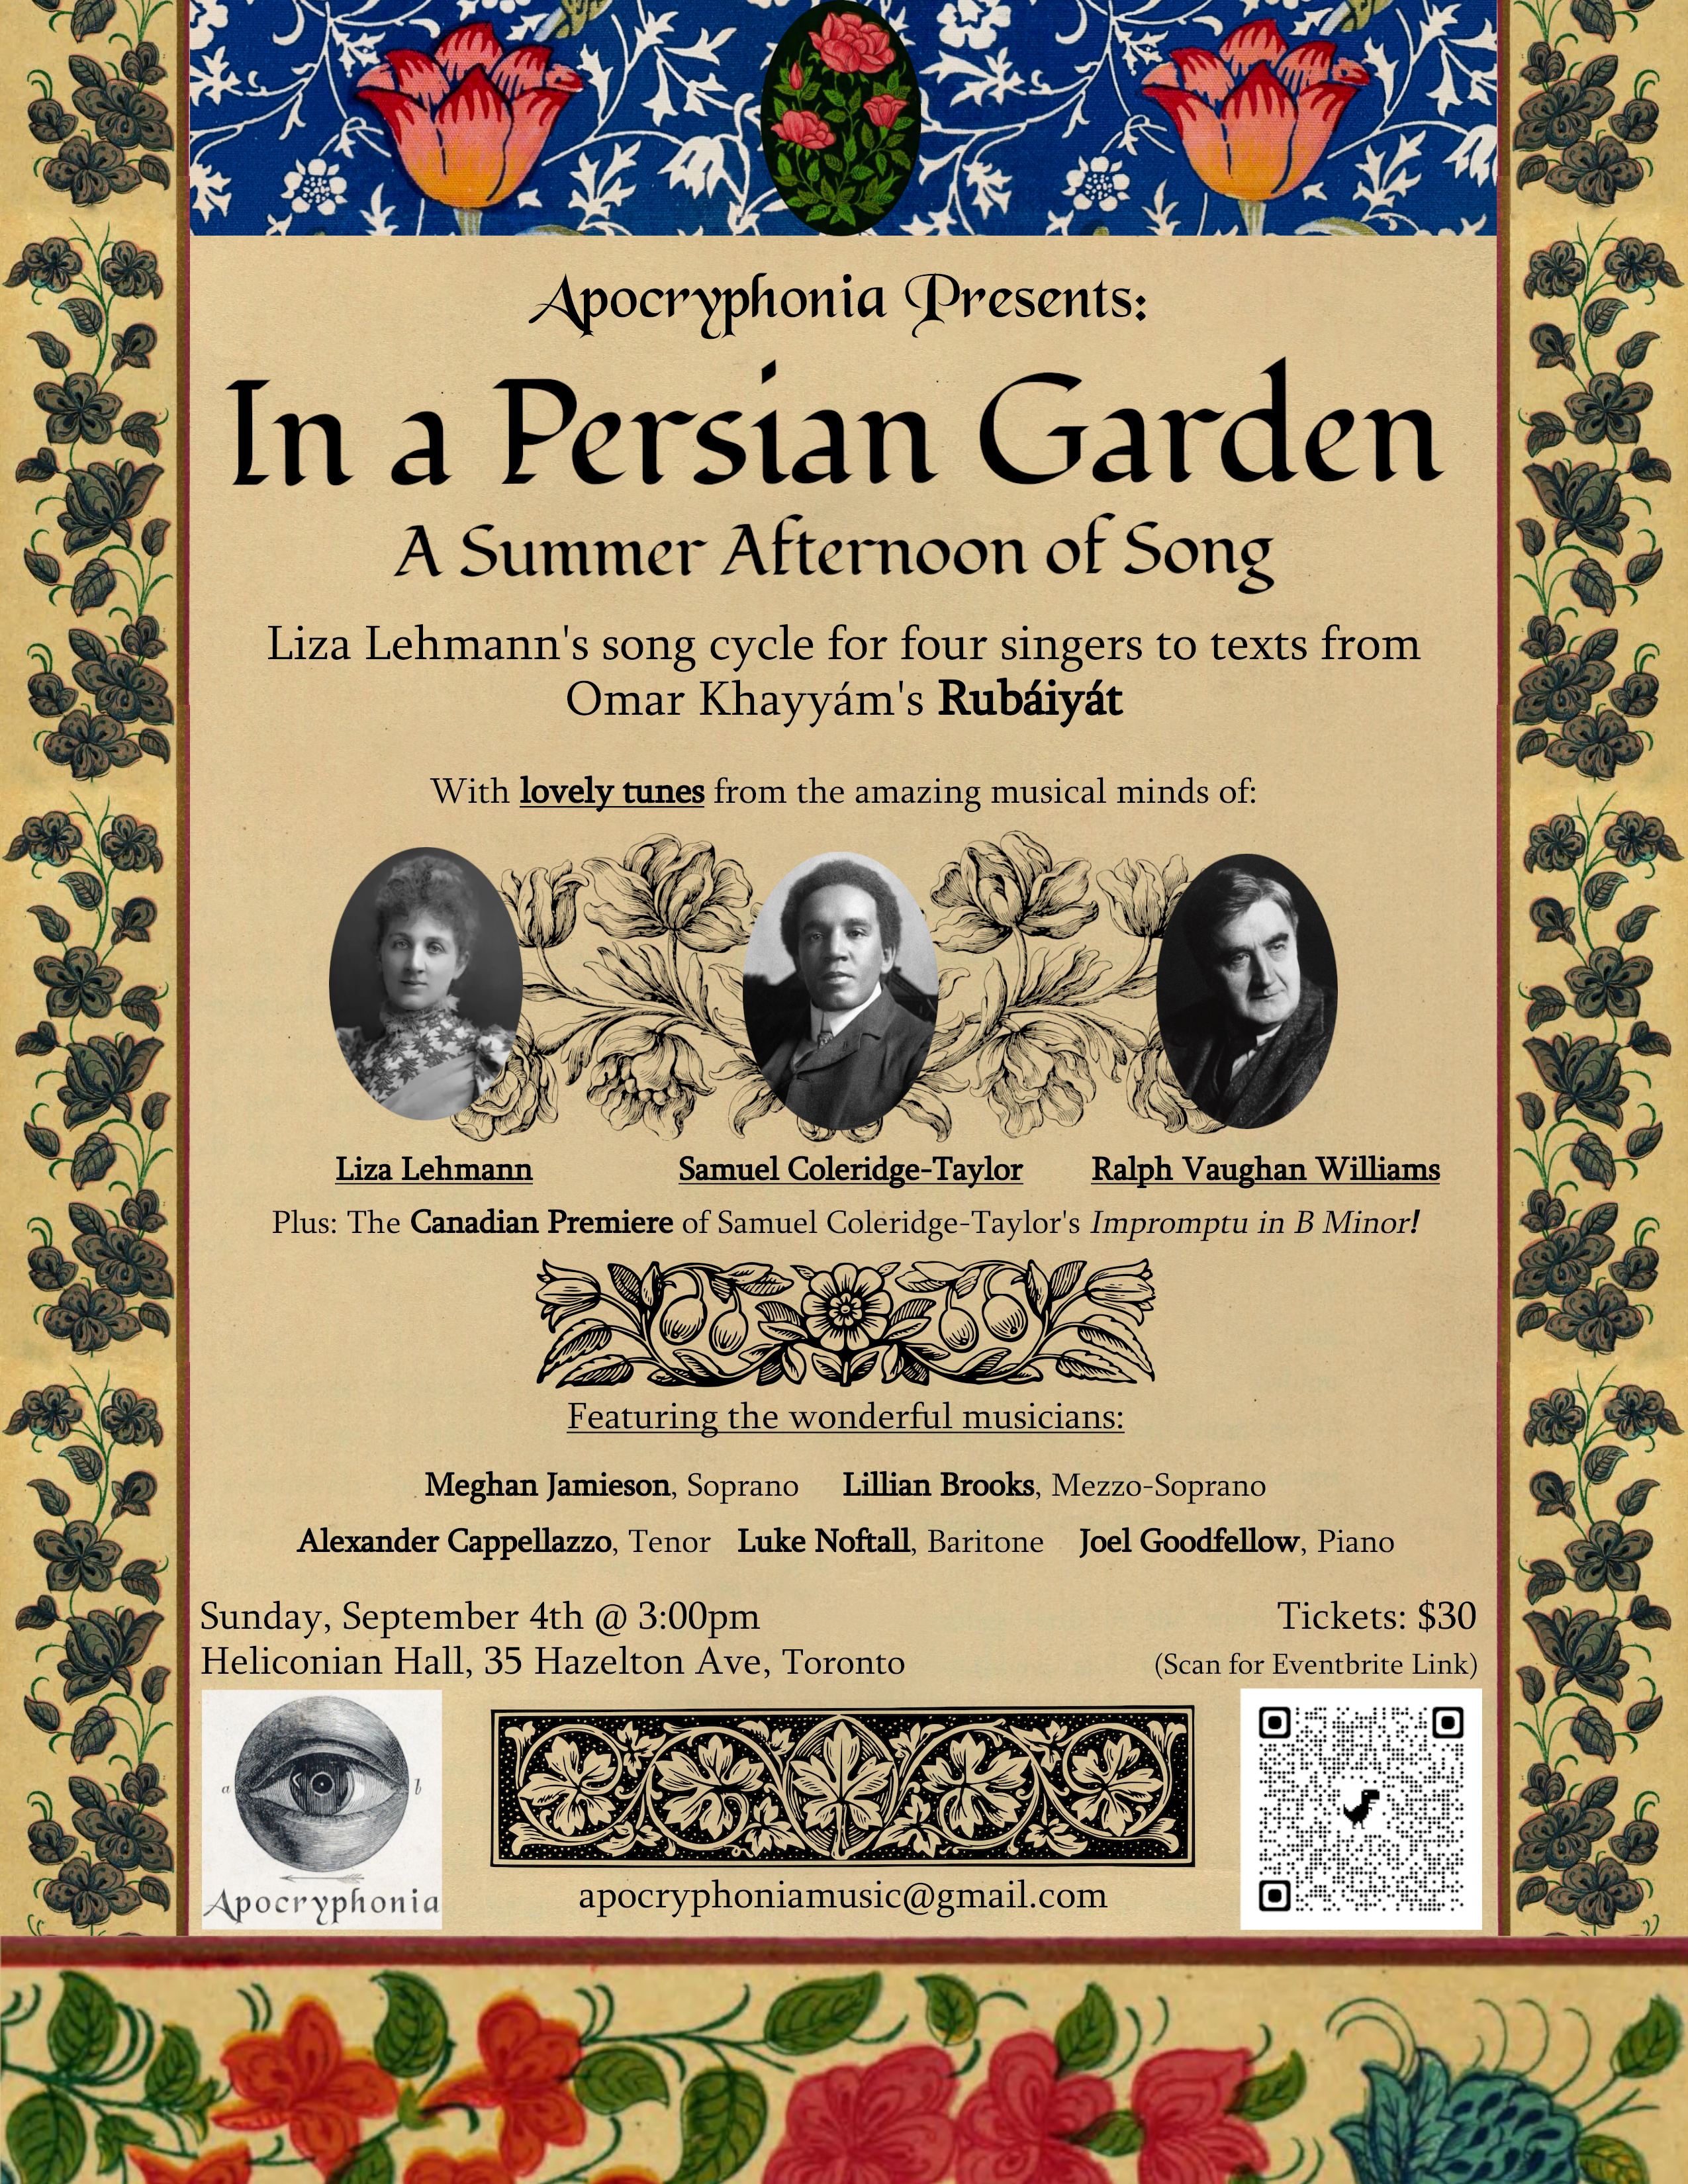 The poster of Apocryphonia's first concert, 'In A Persian Garden: A Summer Afternoon of Song'